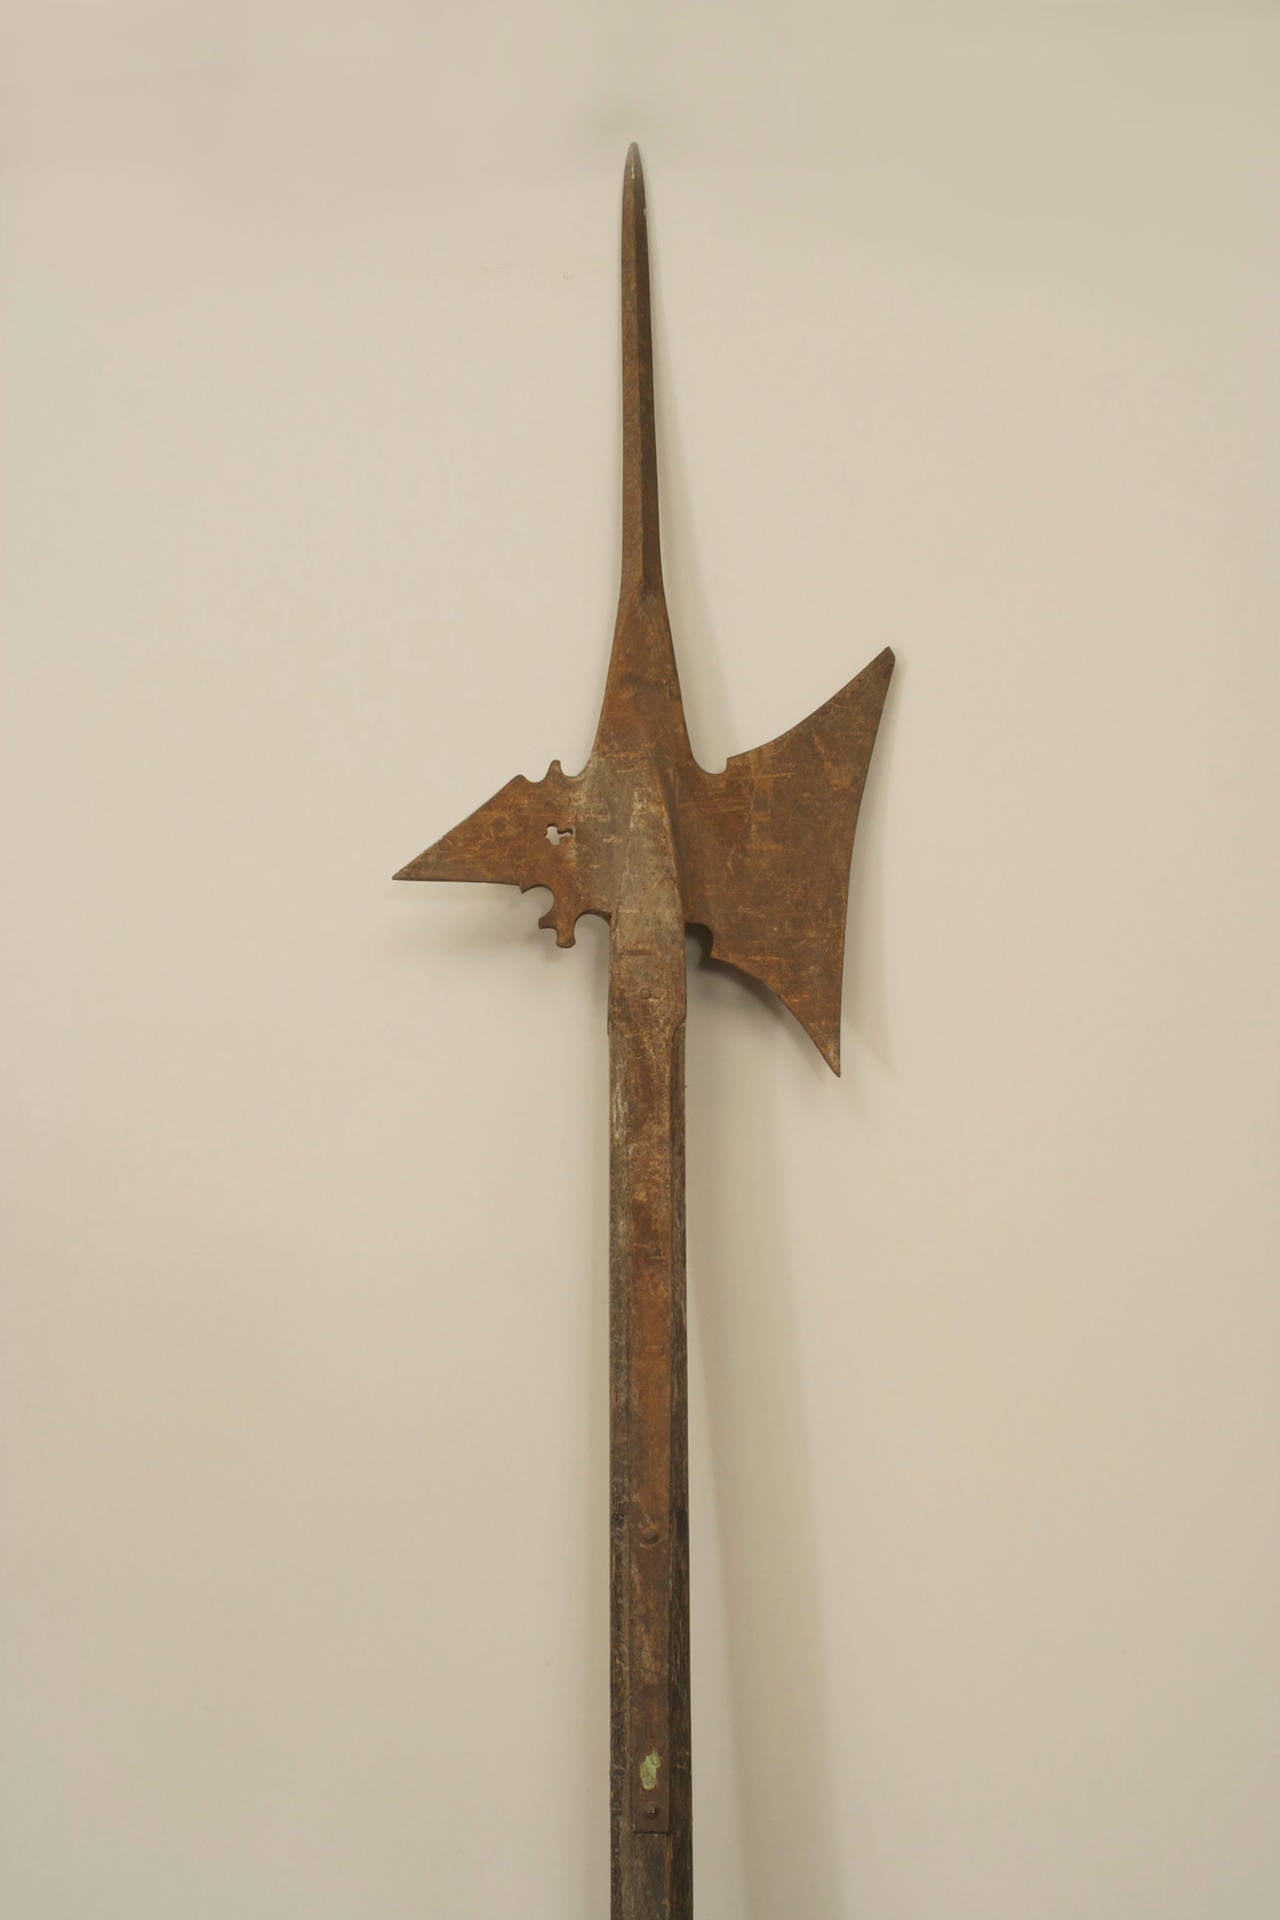 English Renaissance-style halberd spear with eight-sided wooden shaft with nail heads and an iron ax-shaped blade.
